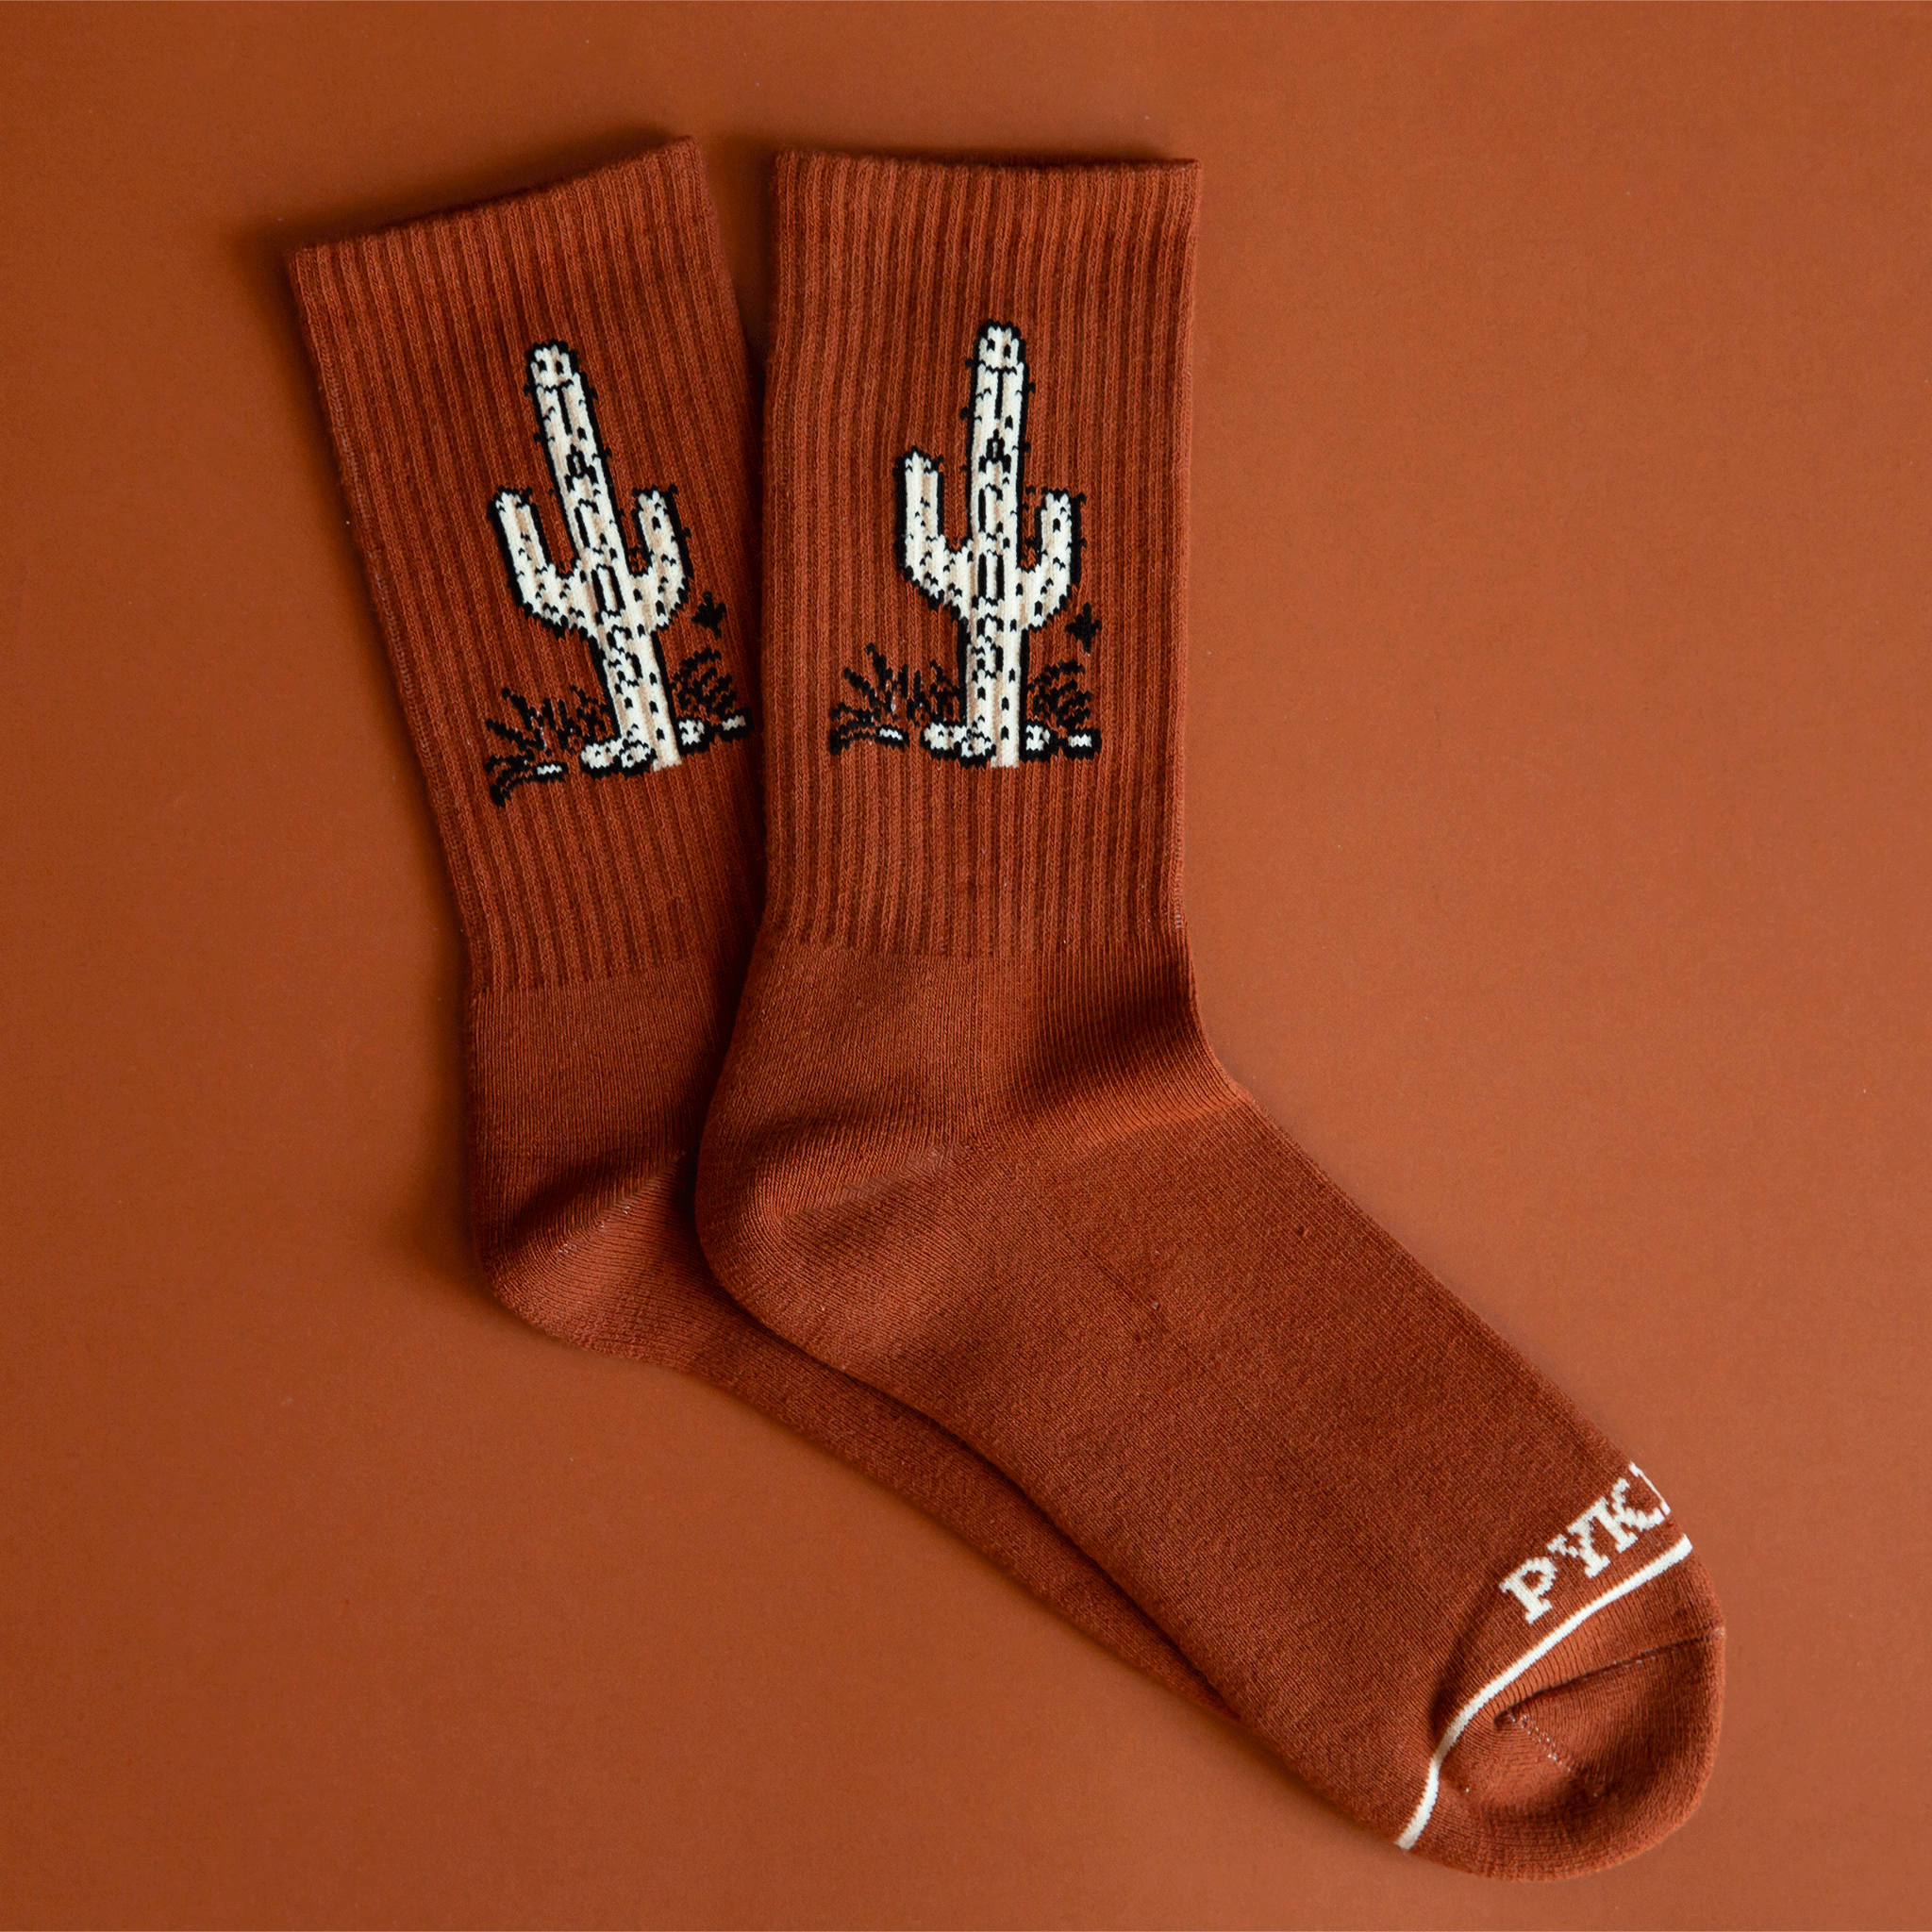 A burnt orange / brown socks with a cactus graphic with "Taco" written down the side of the cactus.